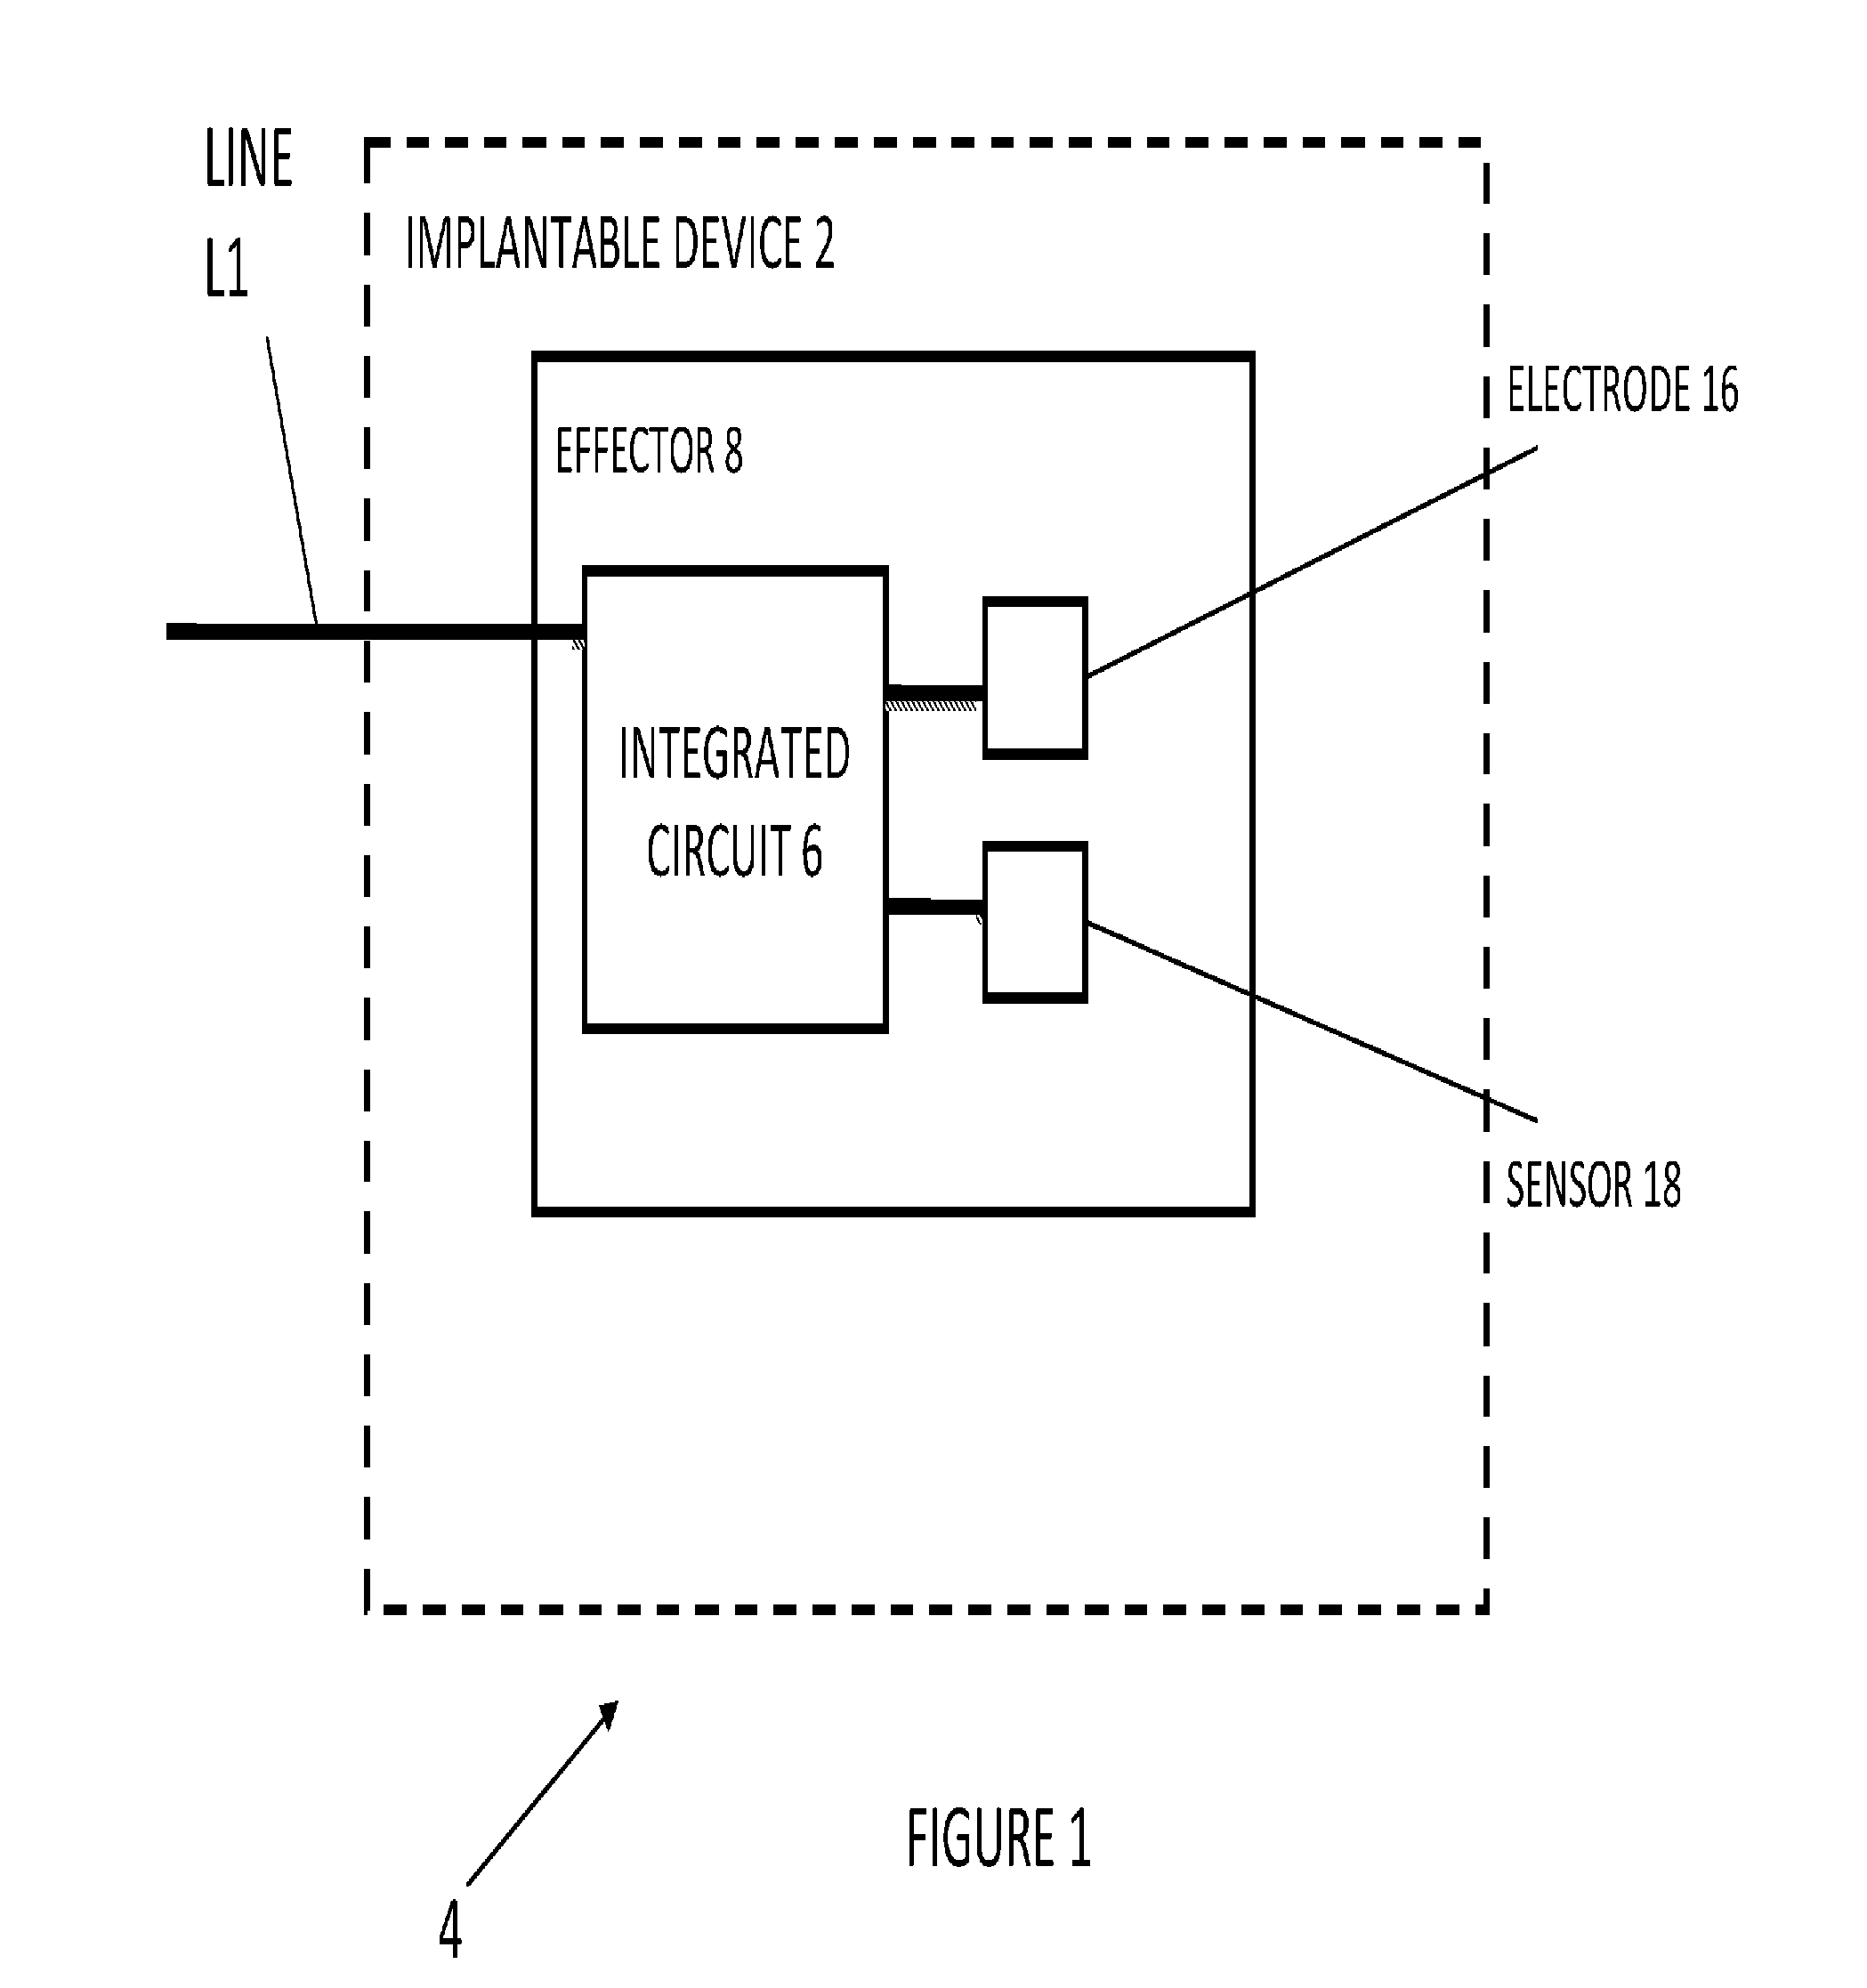 Integrated Circuit Implementation and Fault Control System, Device, and Method